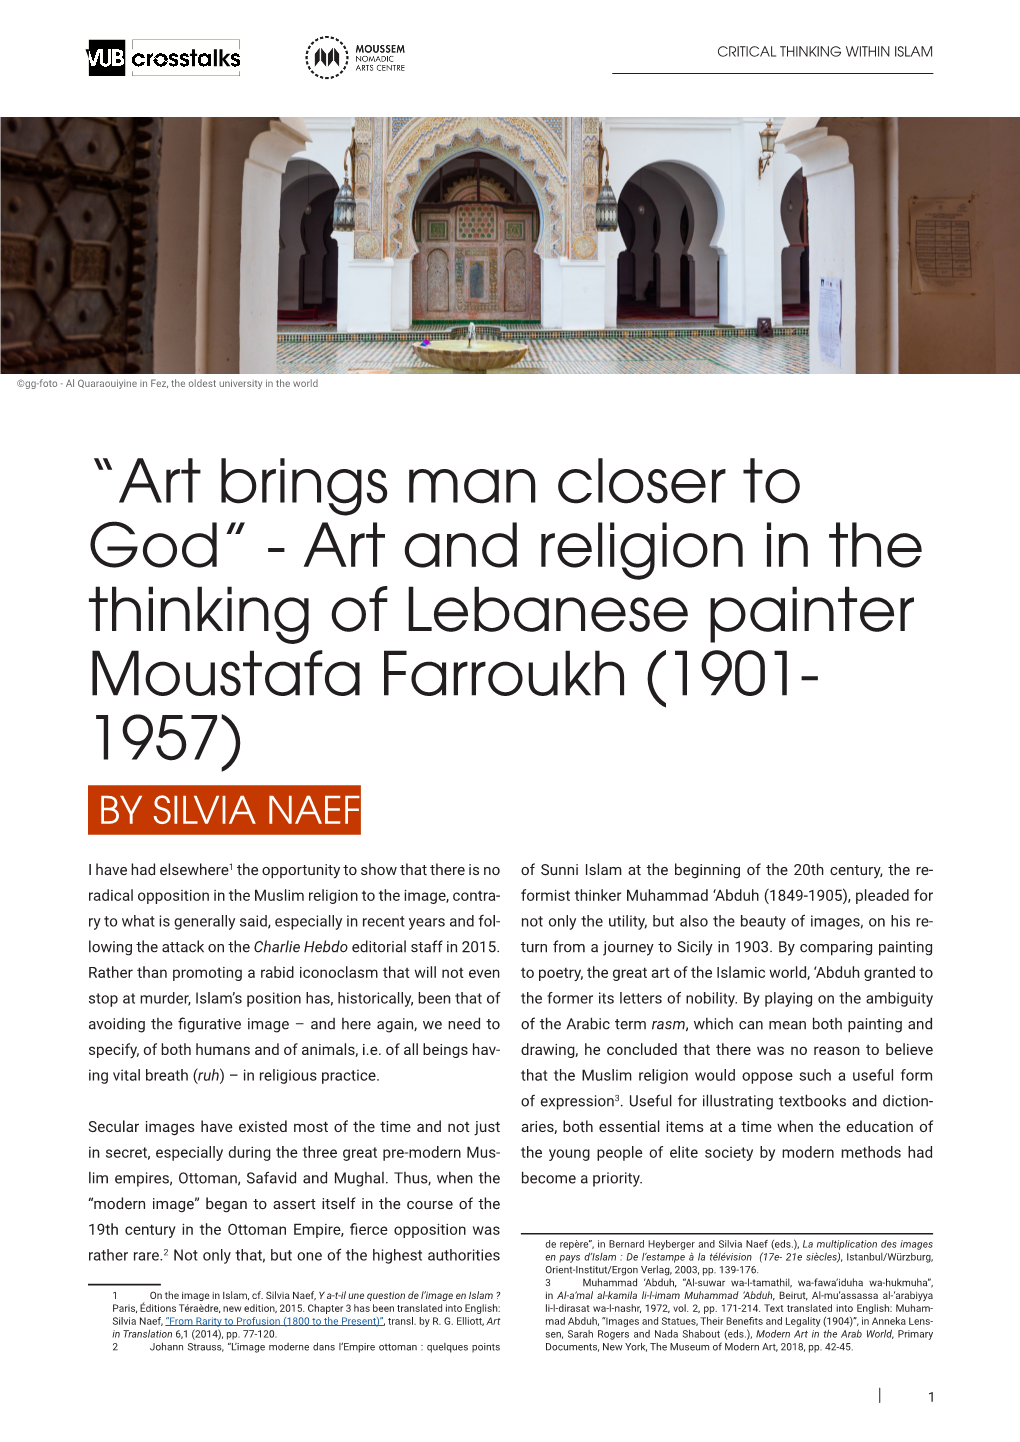 Art and Religion in the Thinking of Lebanese Painter Moustafa Farroukh (1901- 1957) by SILVIA NAEF